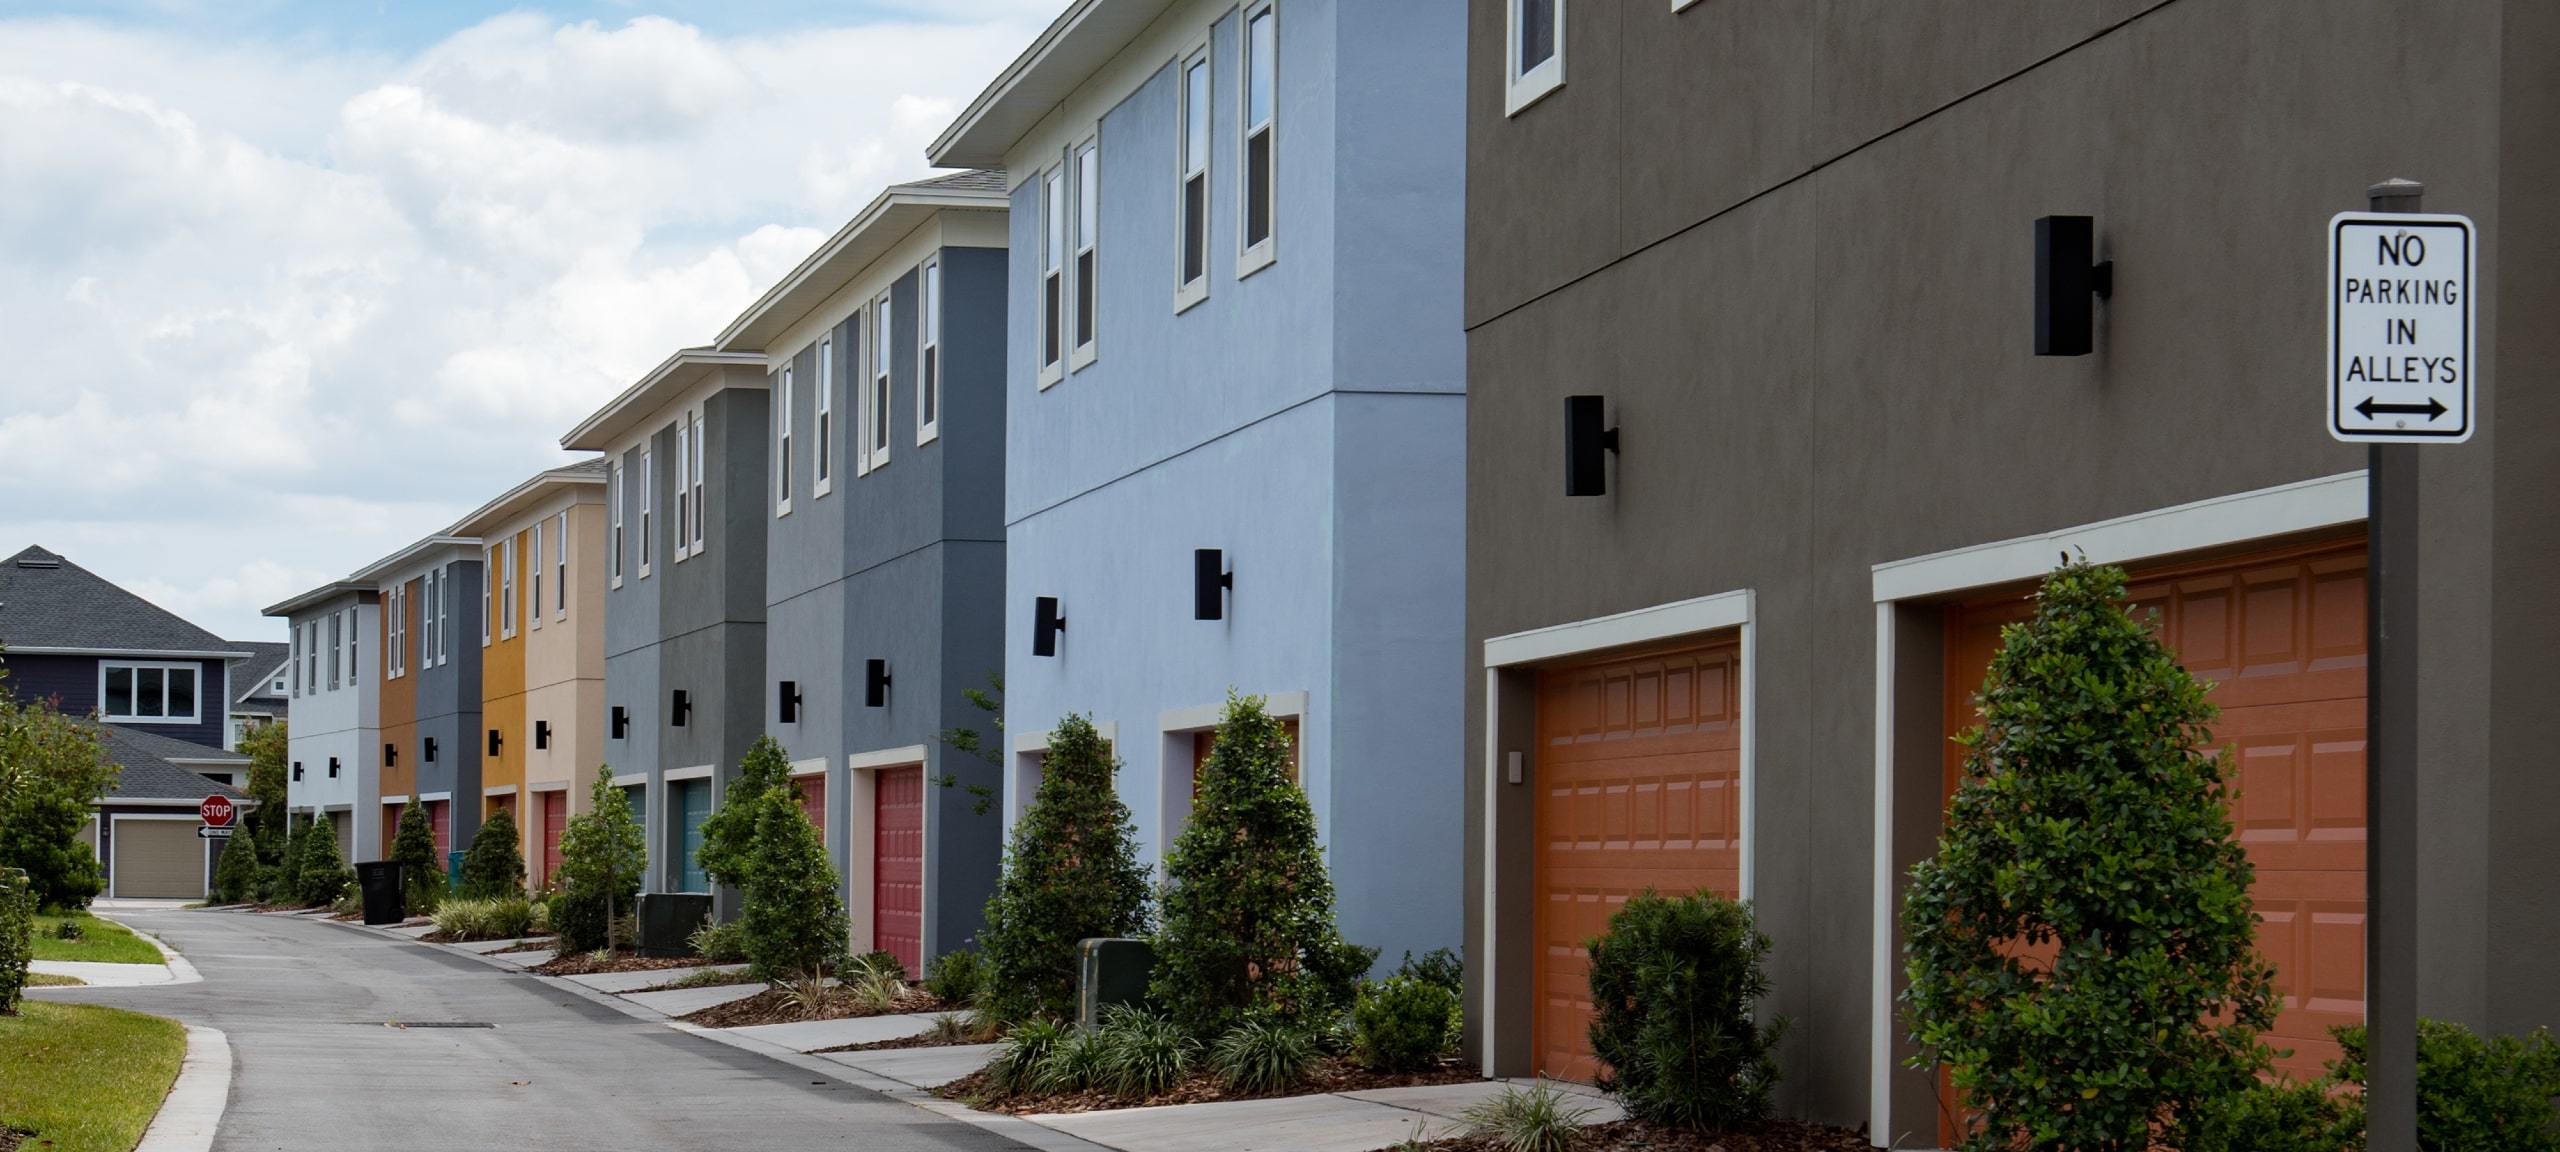 Row of Lake Nona townhomes, back view, on street